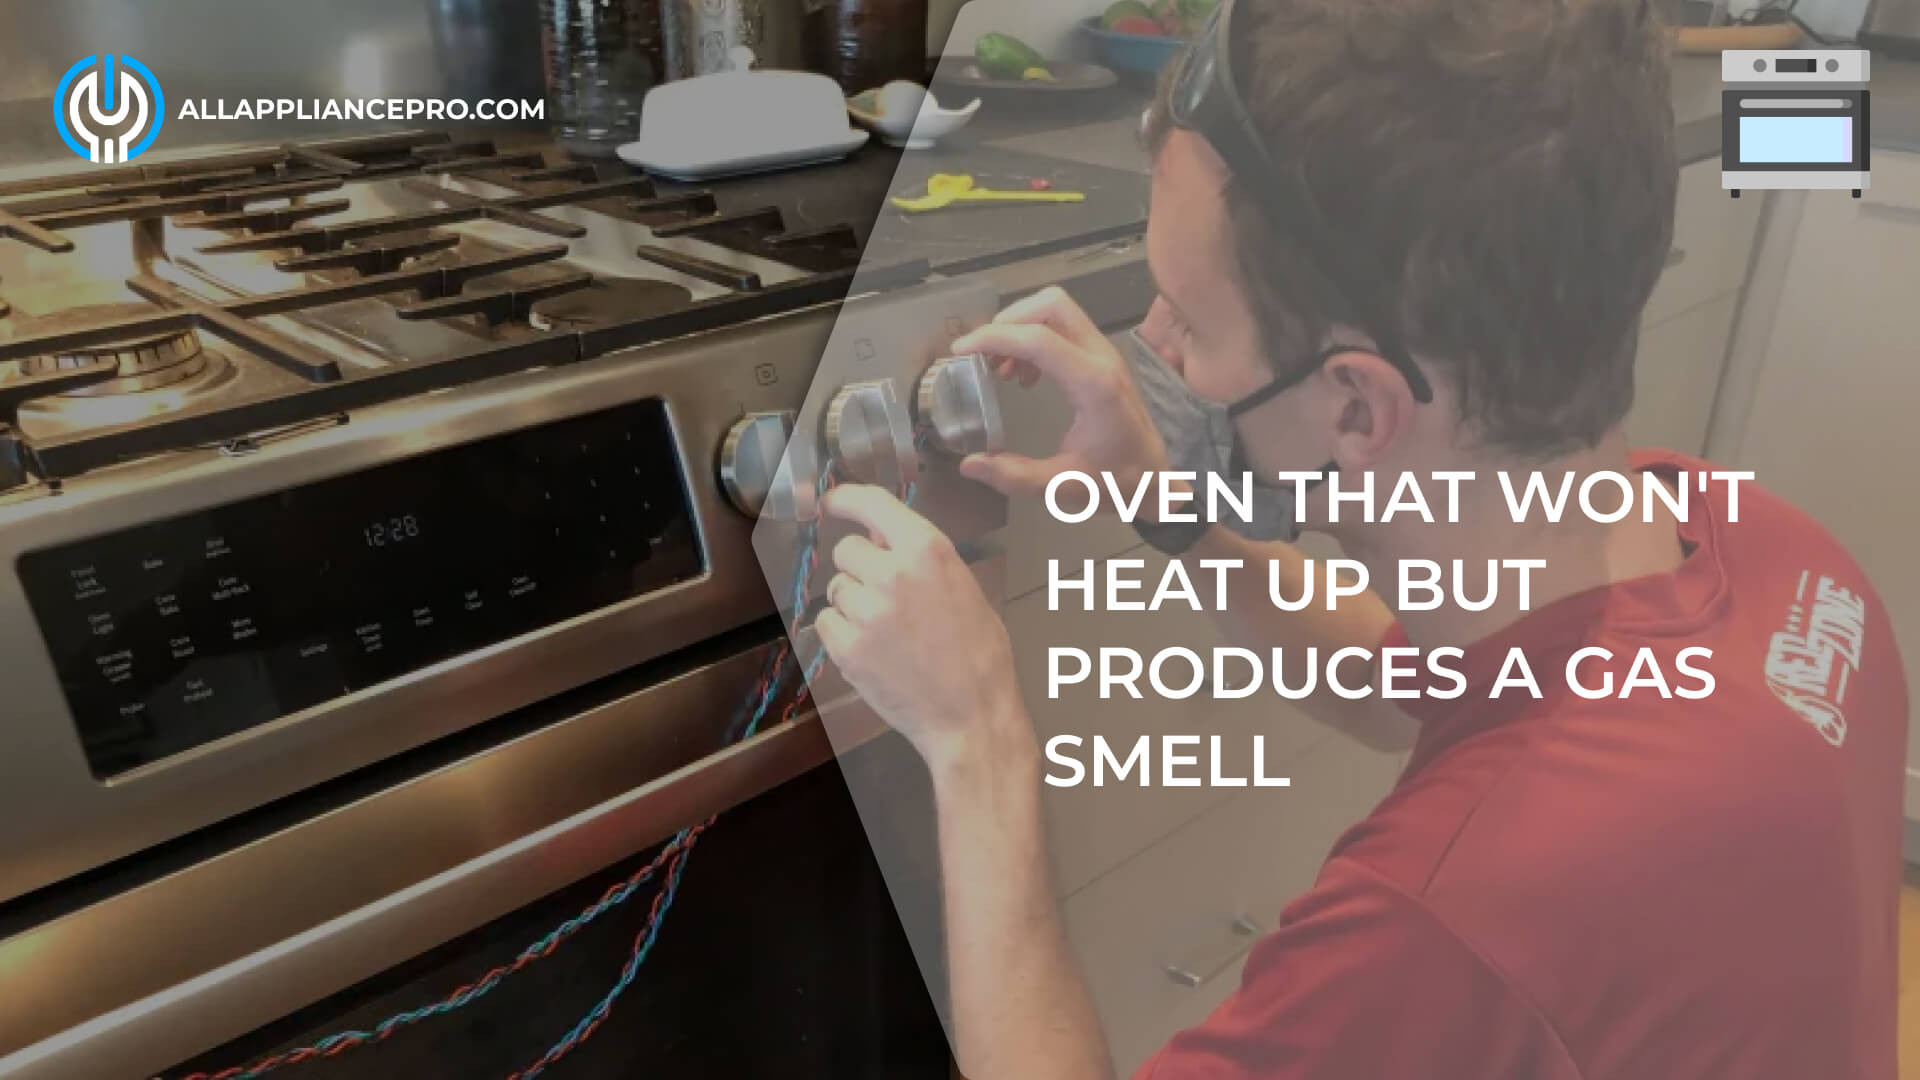 Oven That Won't Heat Up But Produces a Gas Smell